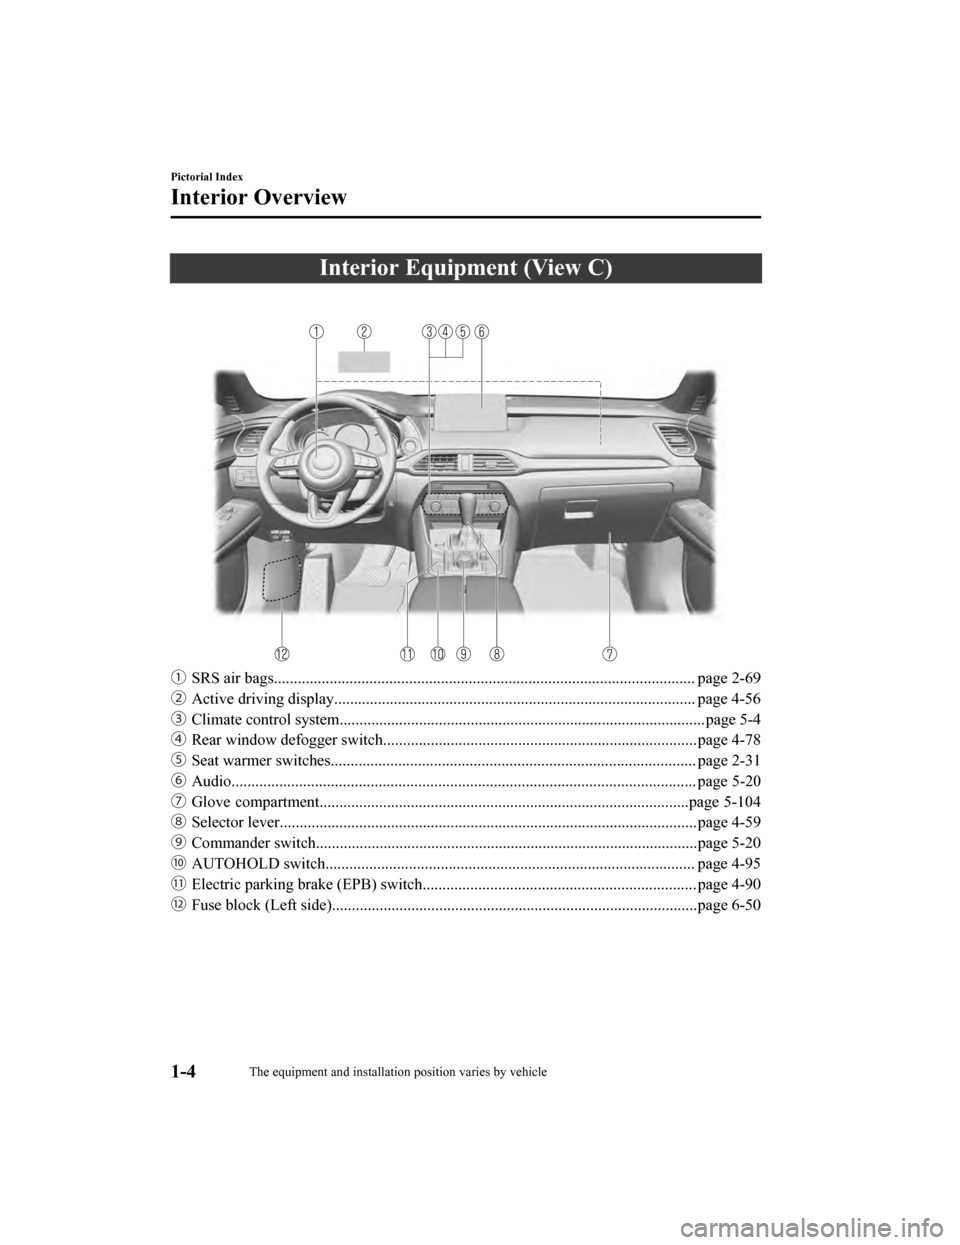 MAZDA MODEL CX-9 2020  Owners Manual (in English) Interior Equipment (View C)
ƒSRS air bags.......................................................................................................... page 2-69
„ Active driving display.............